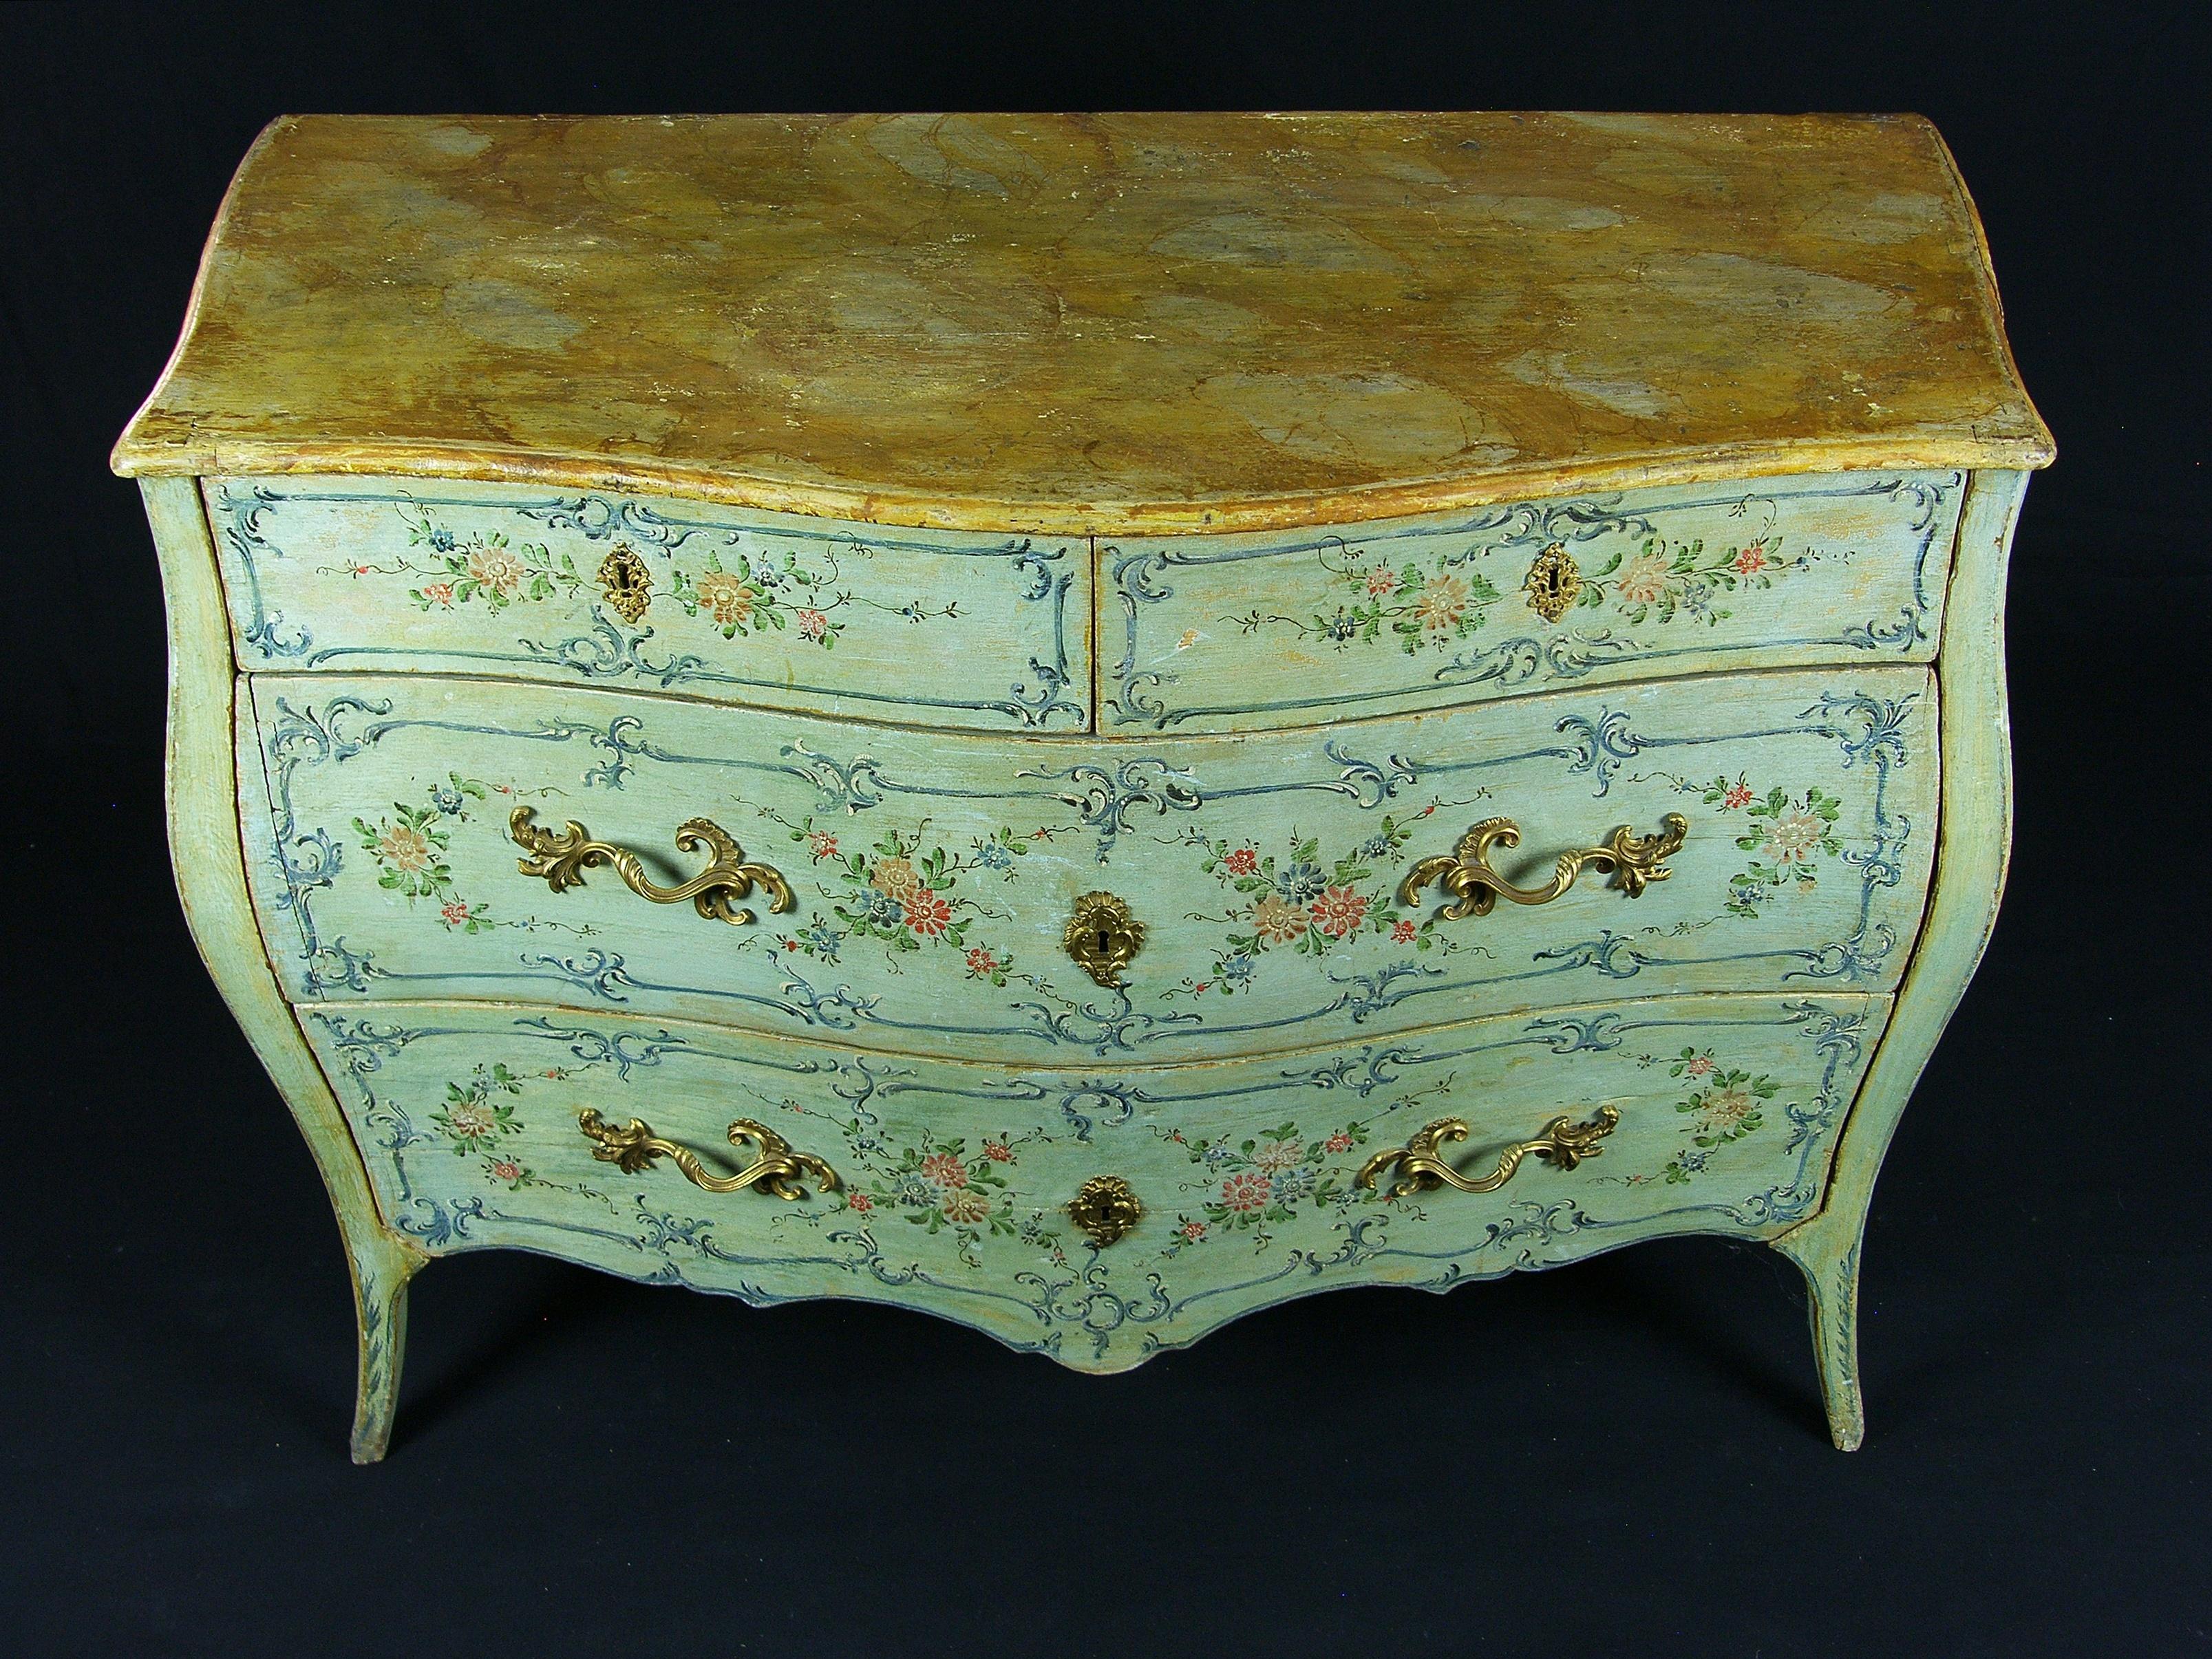 Louis XV 18th Century Italian Polychrome Lacquered Wooden Dresser with Floral Decorations